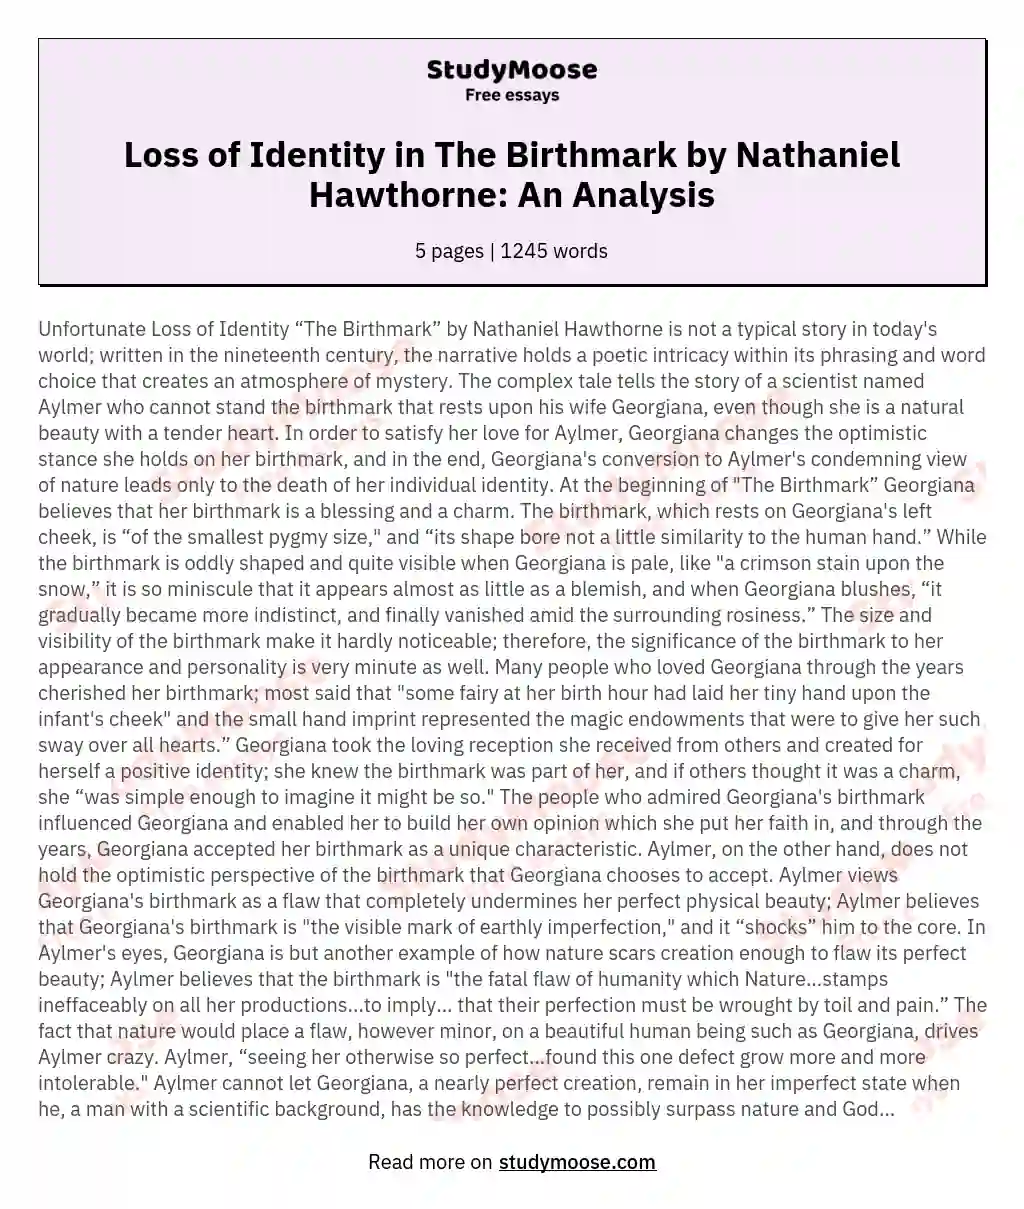 Loss of Identity in The Birthmark by Nathaniel Hawthorne: An Analysis essay